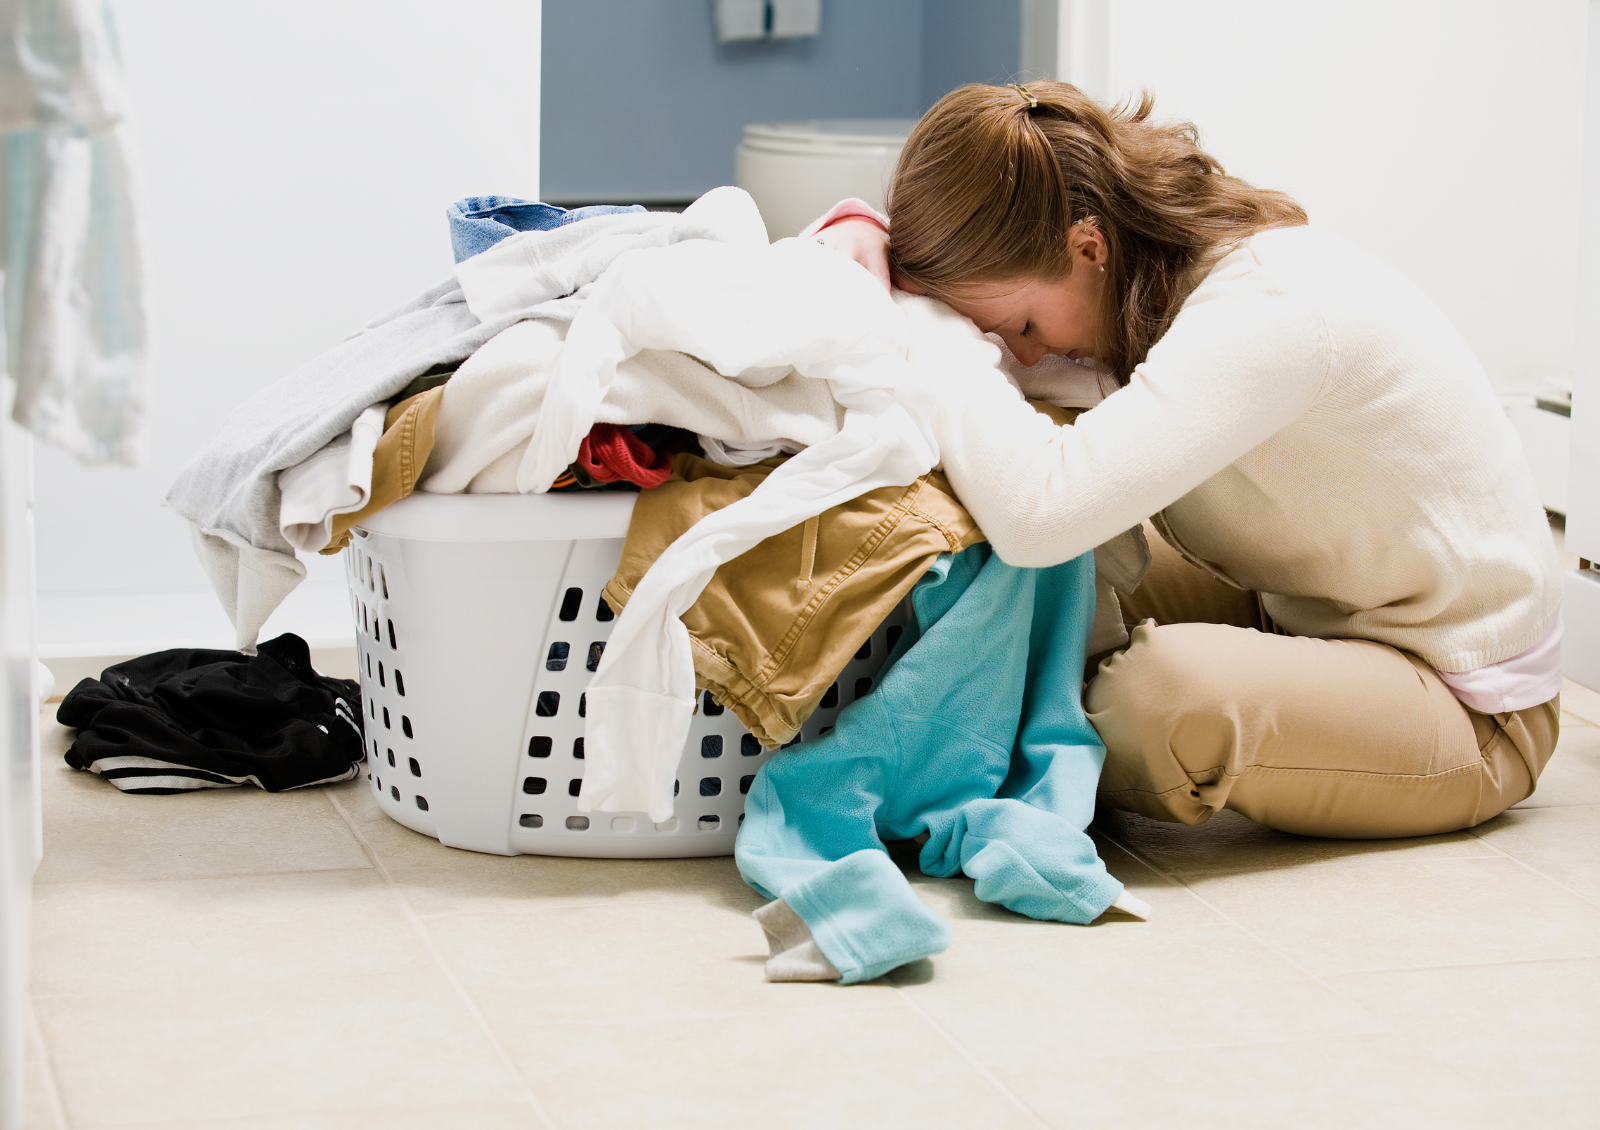 Top 5 Common Laundry Mistakes and How to Avoid Them